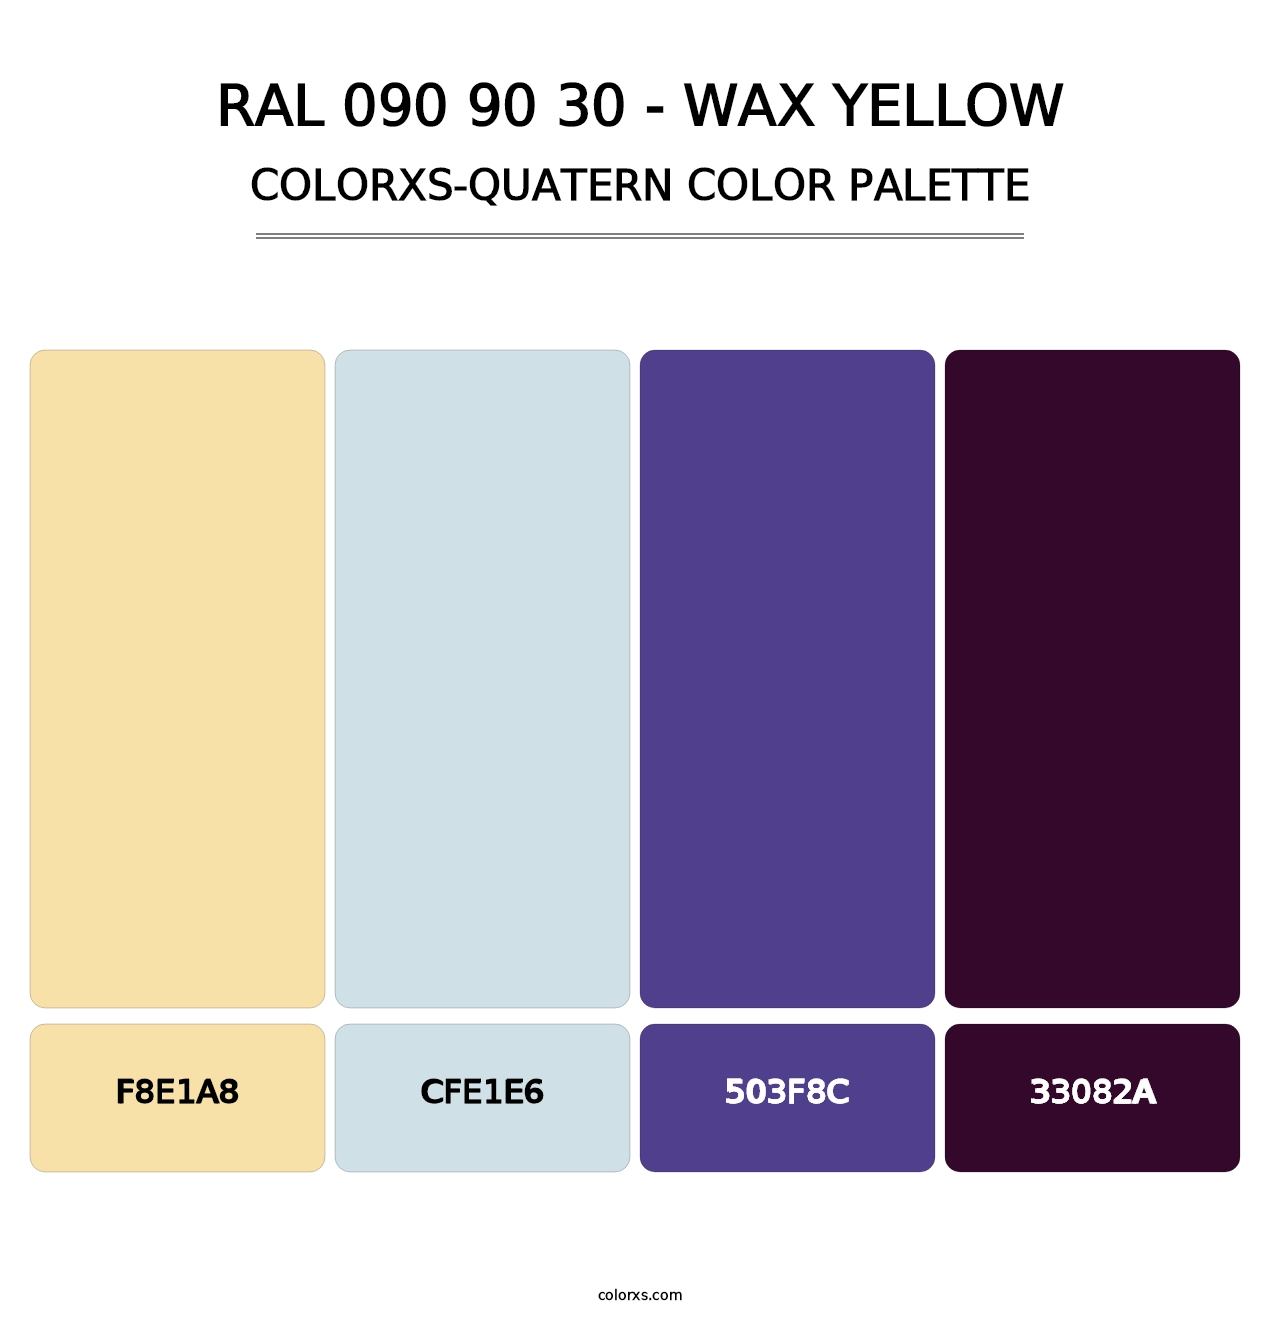 RAL 090 90 30 - Wax Yellow - Colorxs Quatern Palette